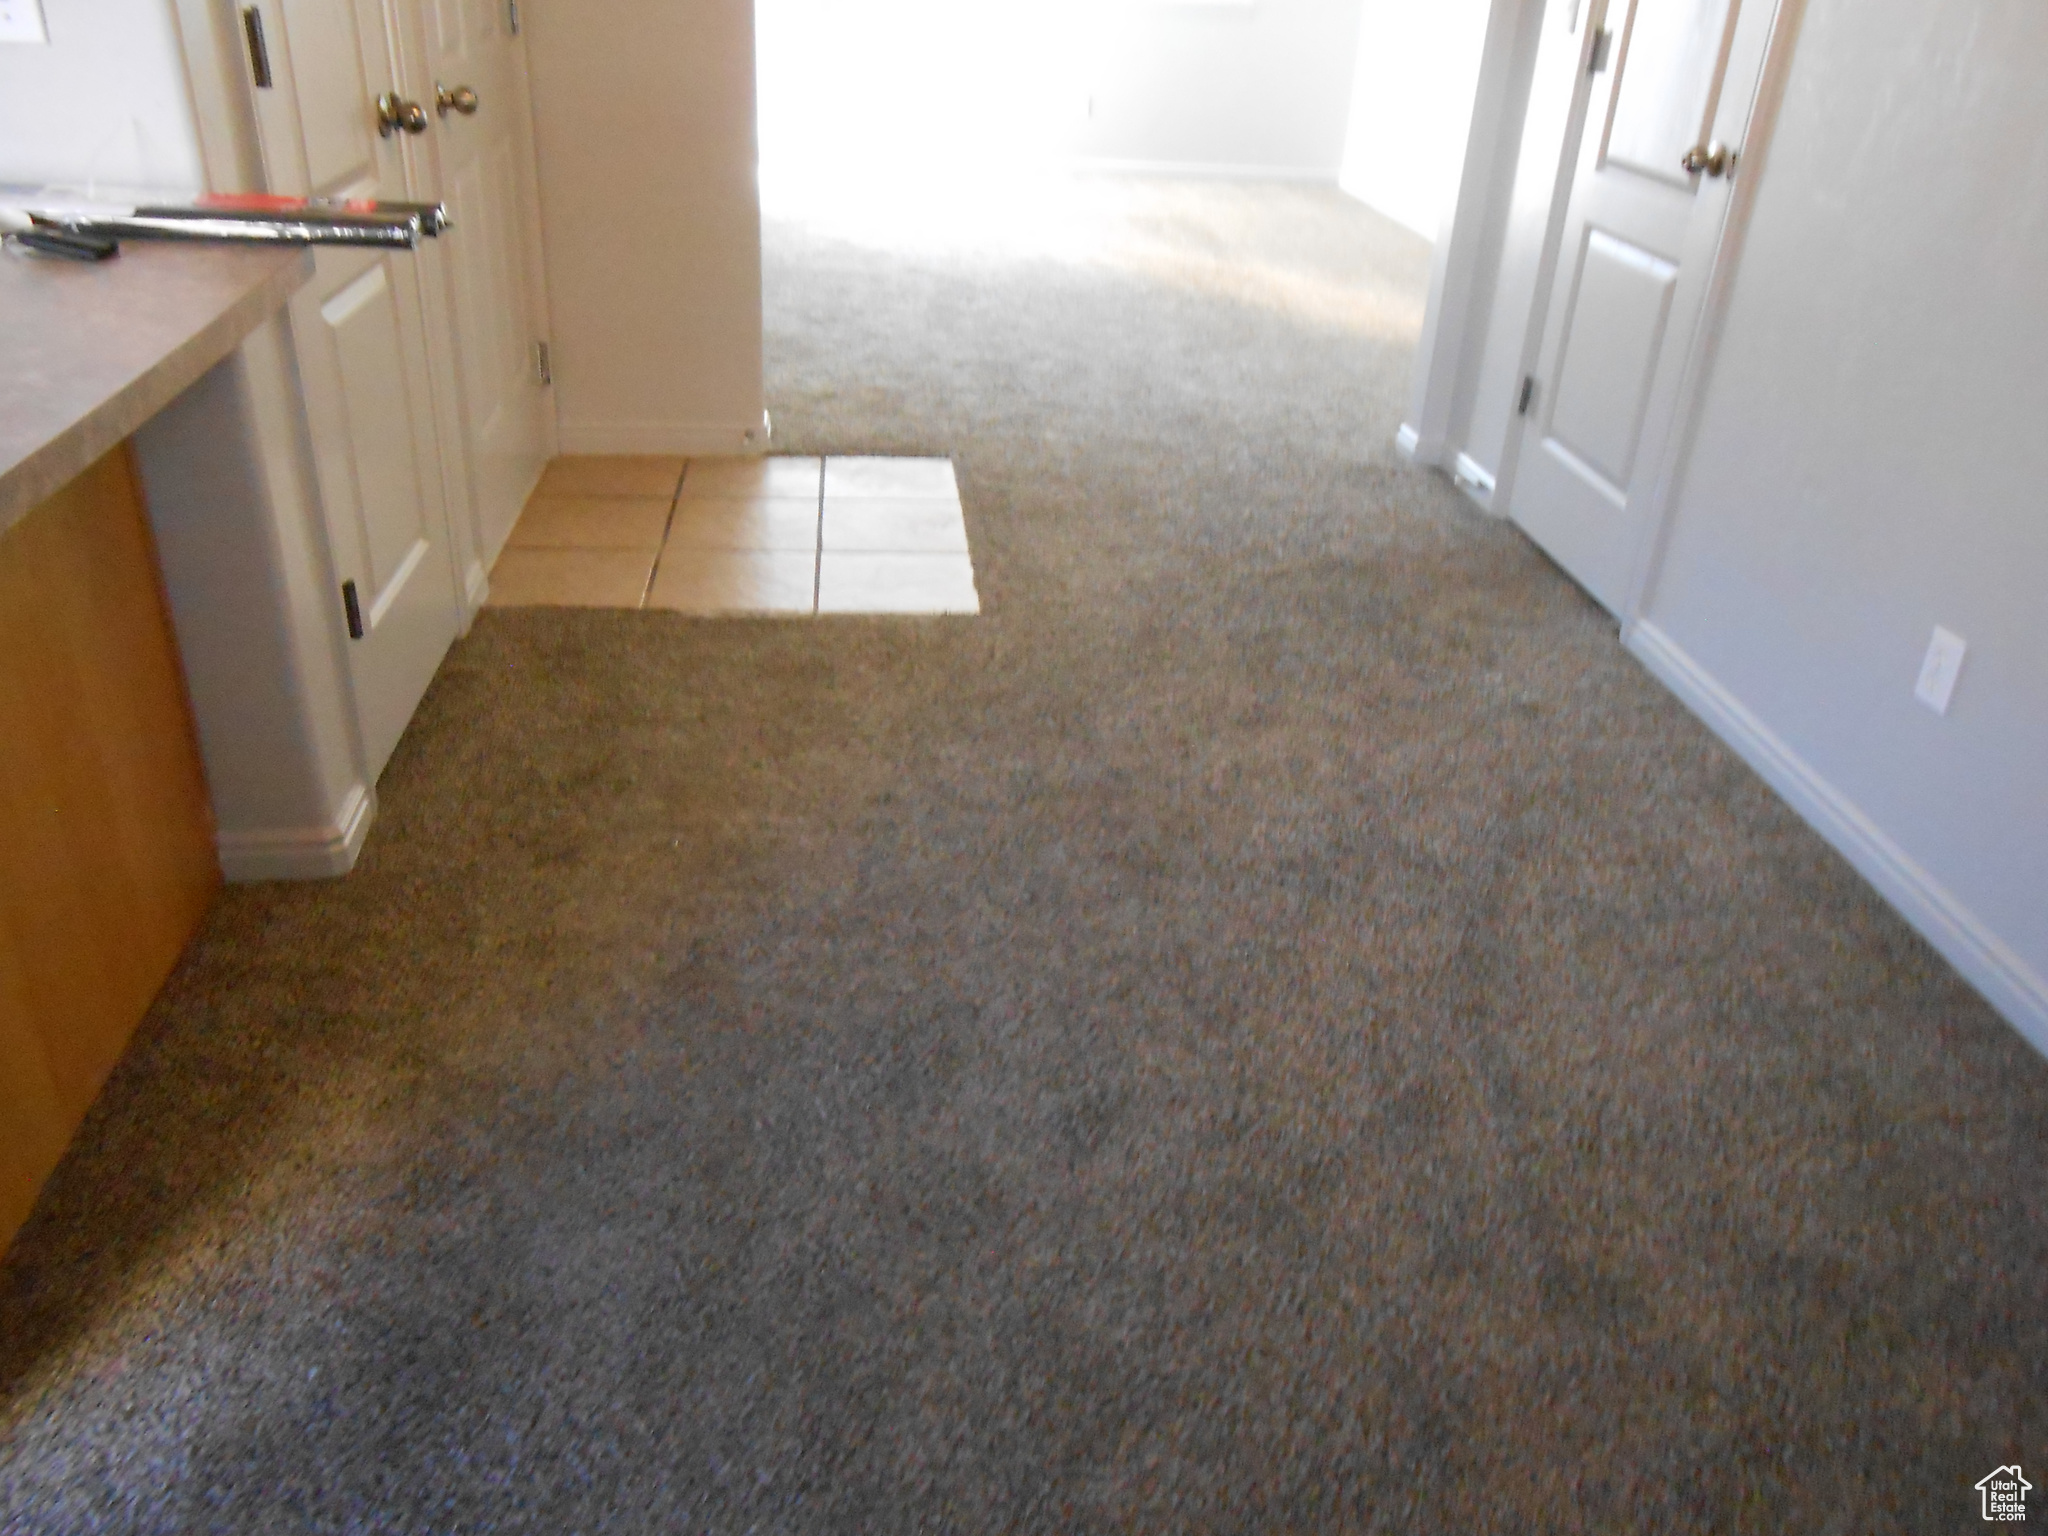 Details with light colored carpet